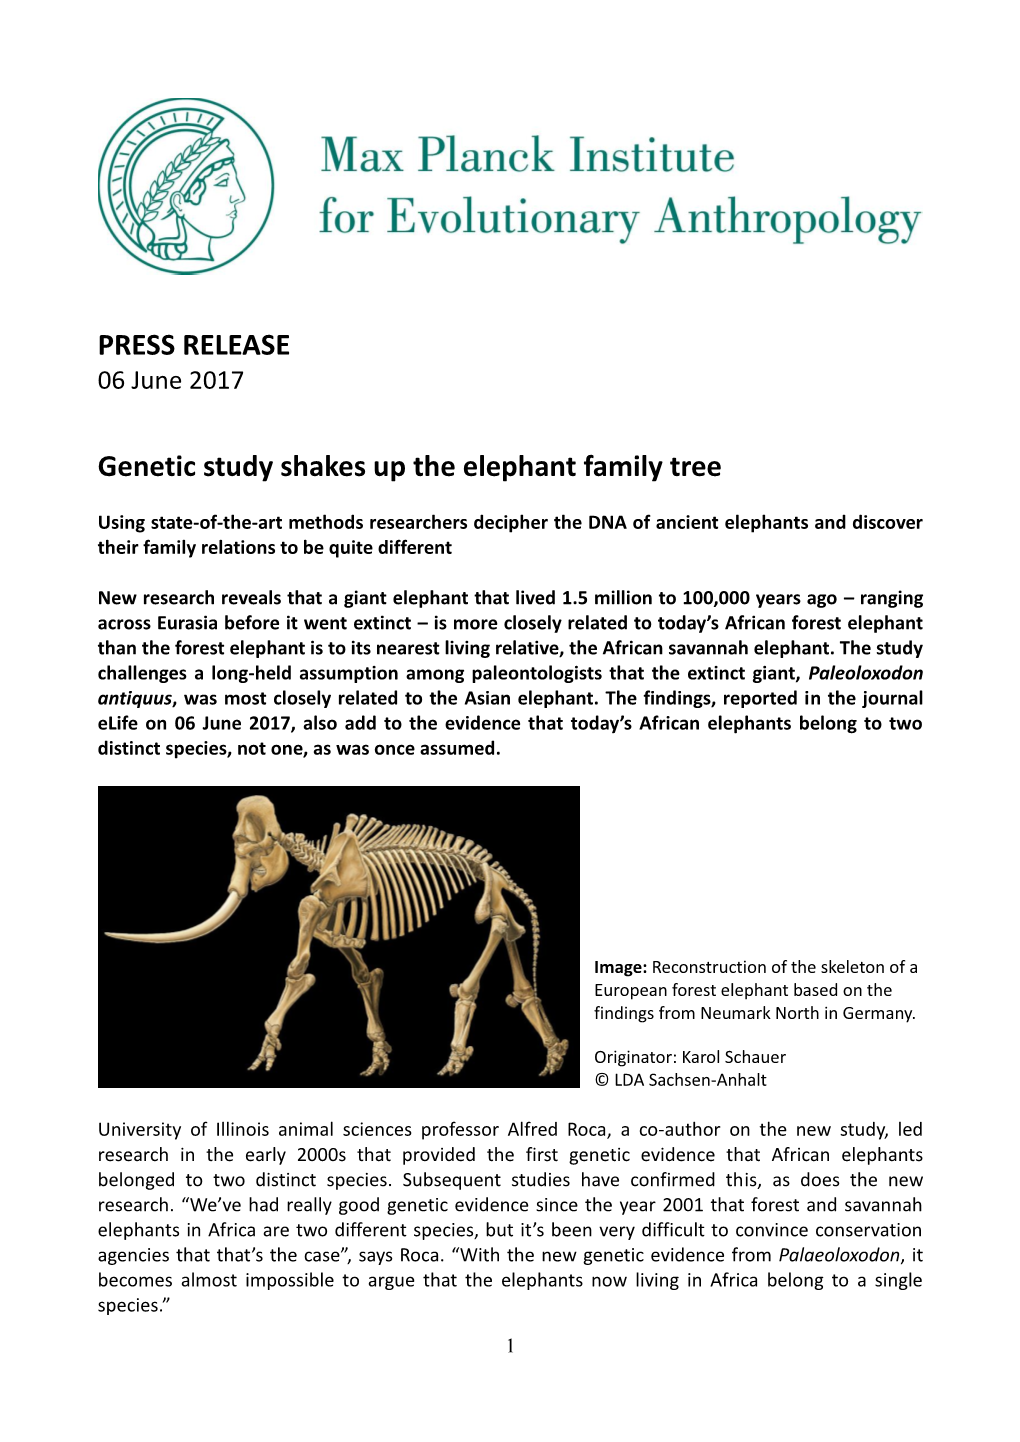 PRESS RELEASE Genetic Study Shakes up the Elephant Family Tree